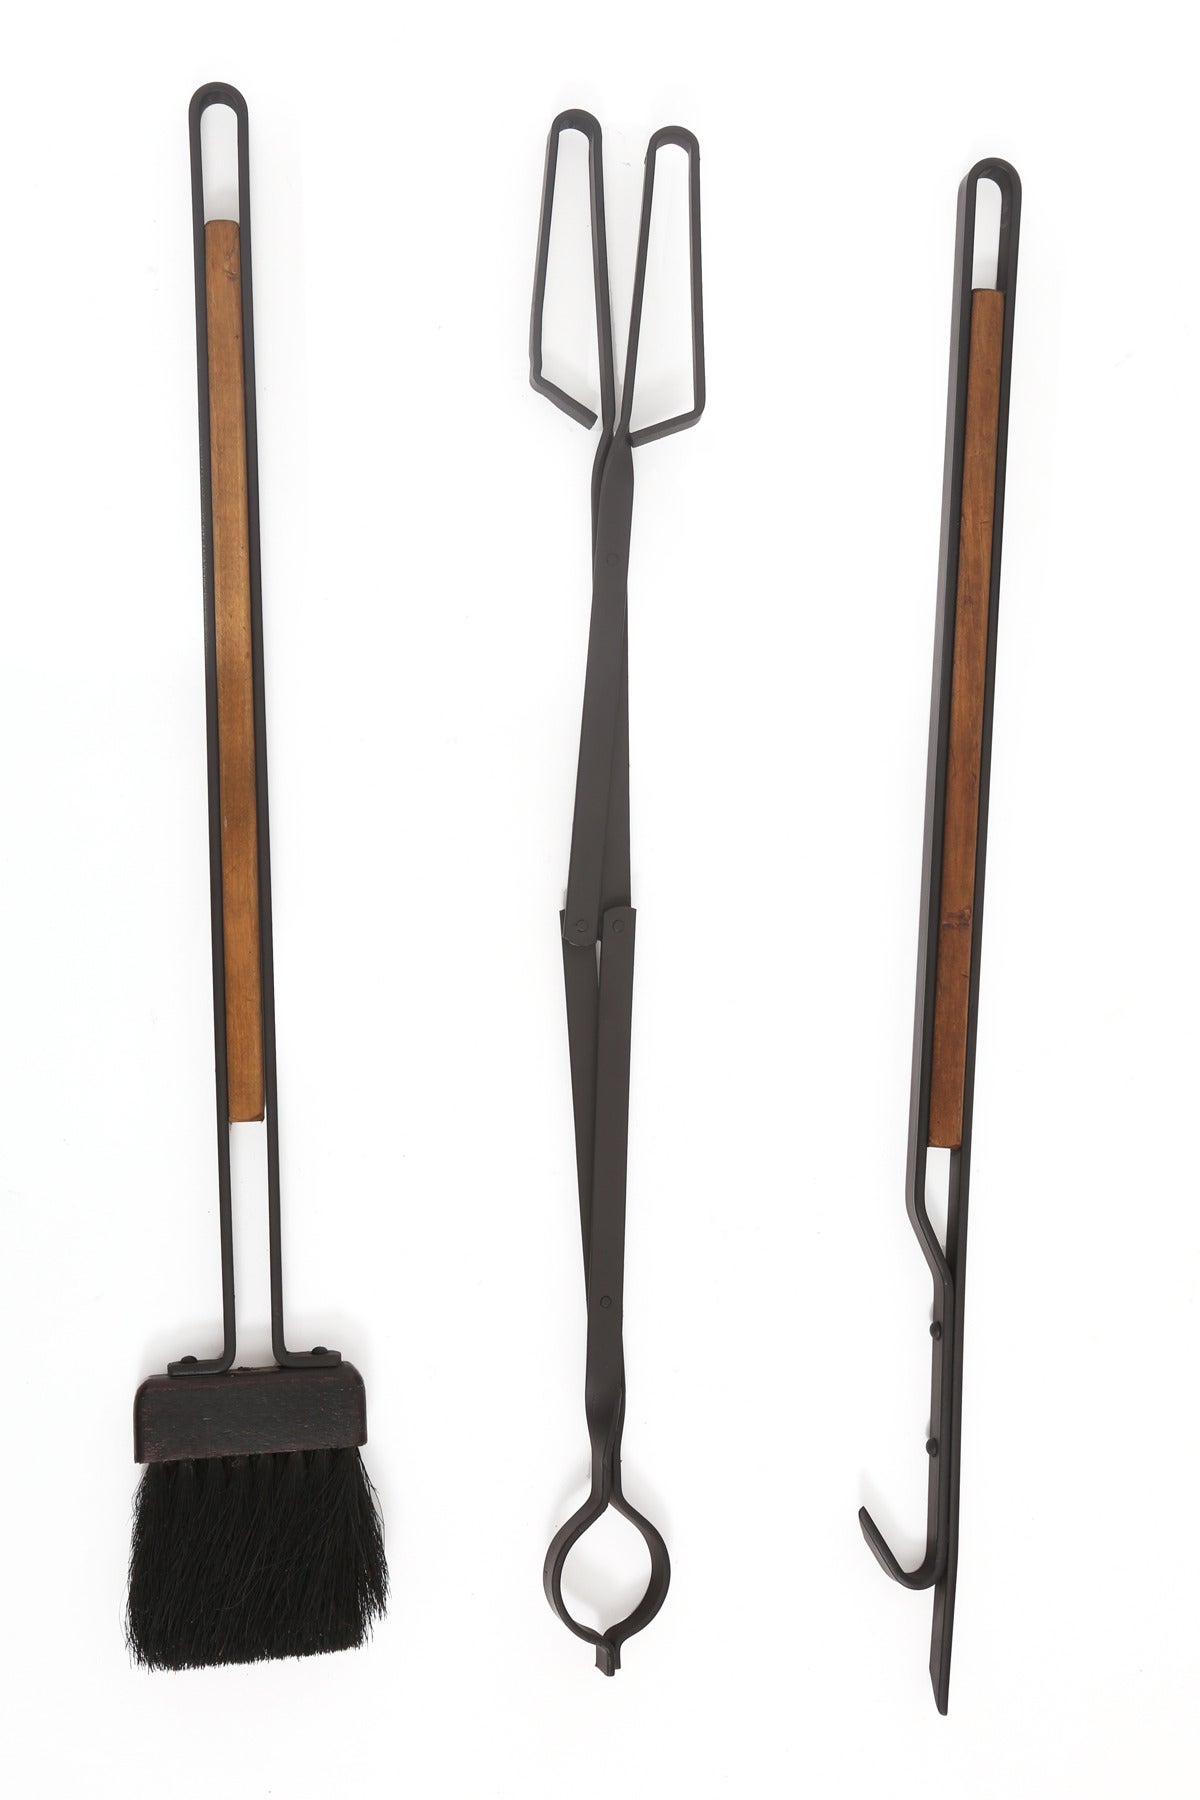 Sculptural iron and wood fireplace tools, circa mid-1960s. These examples have solid iron frames with inset wood detailing.